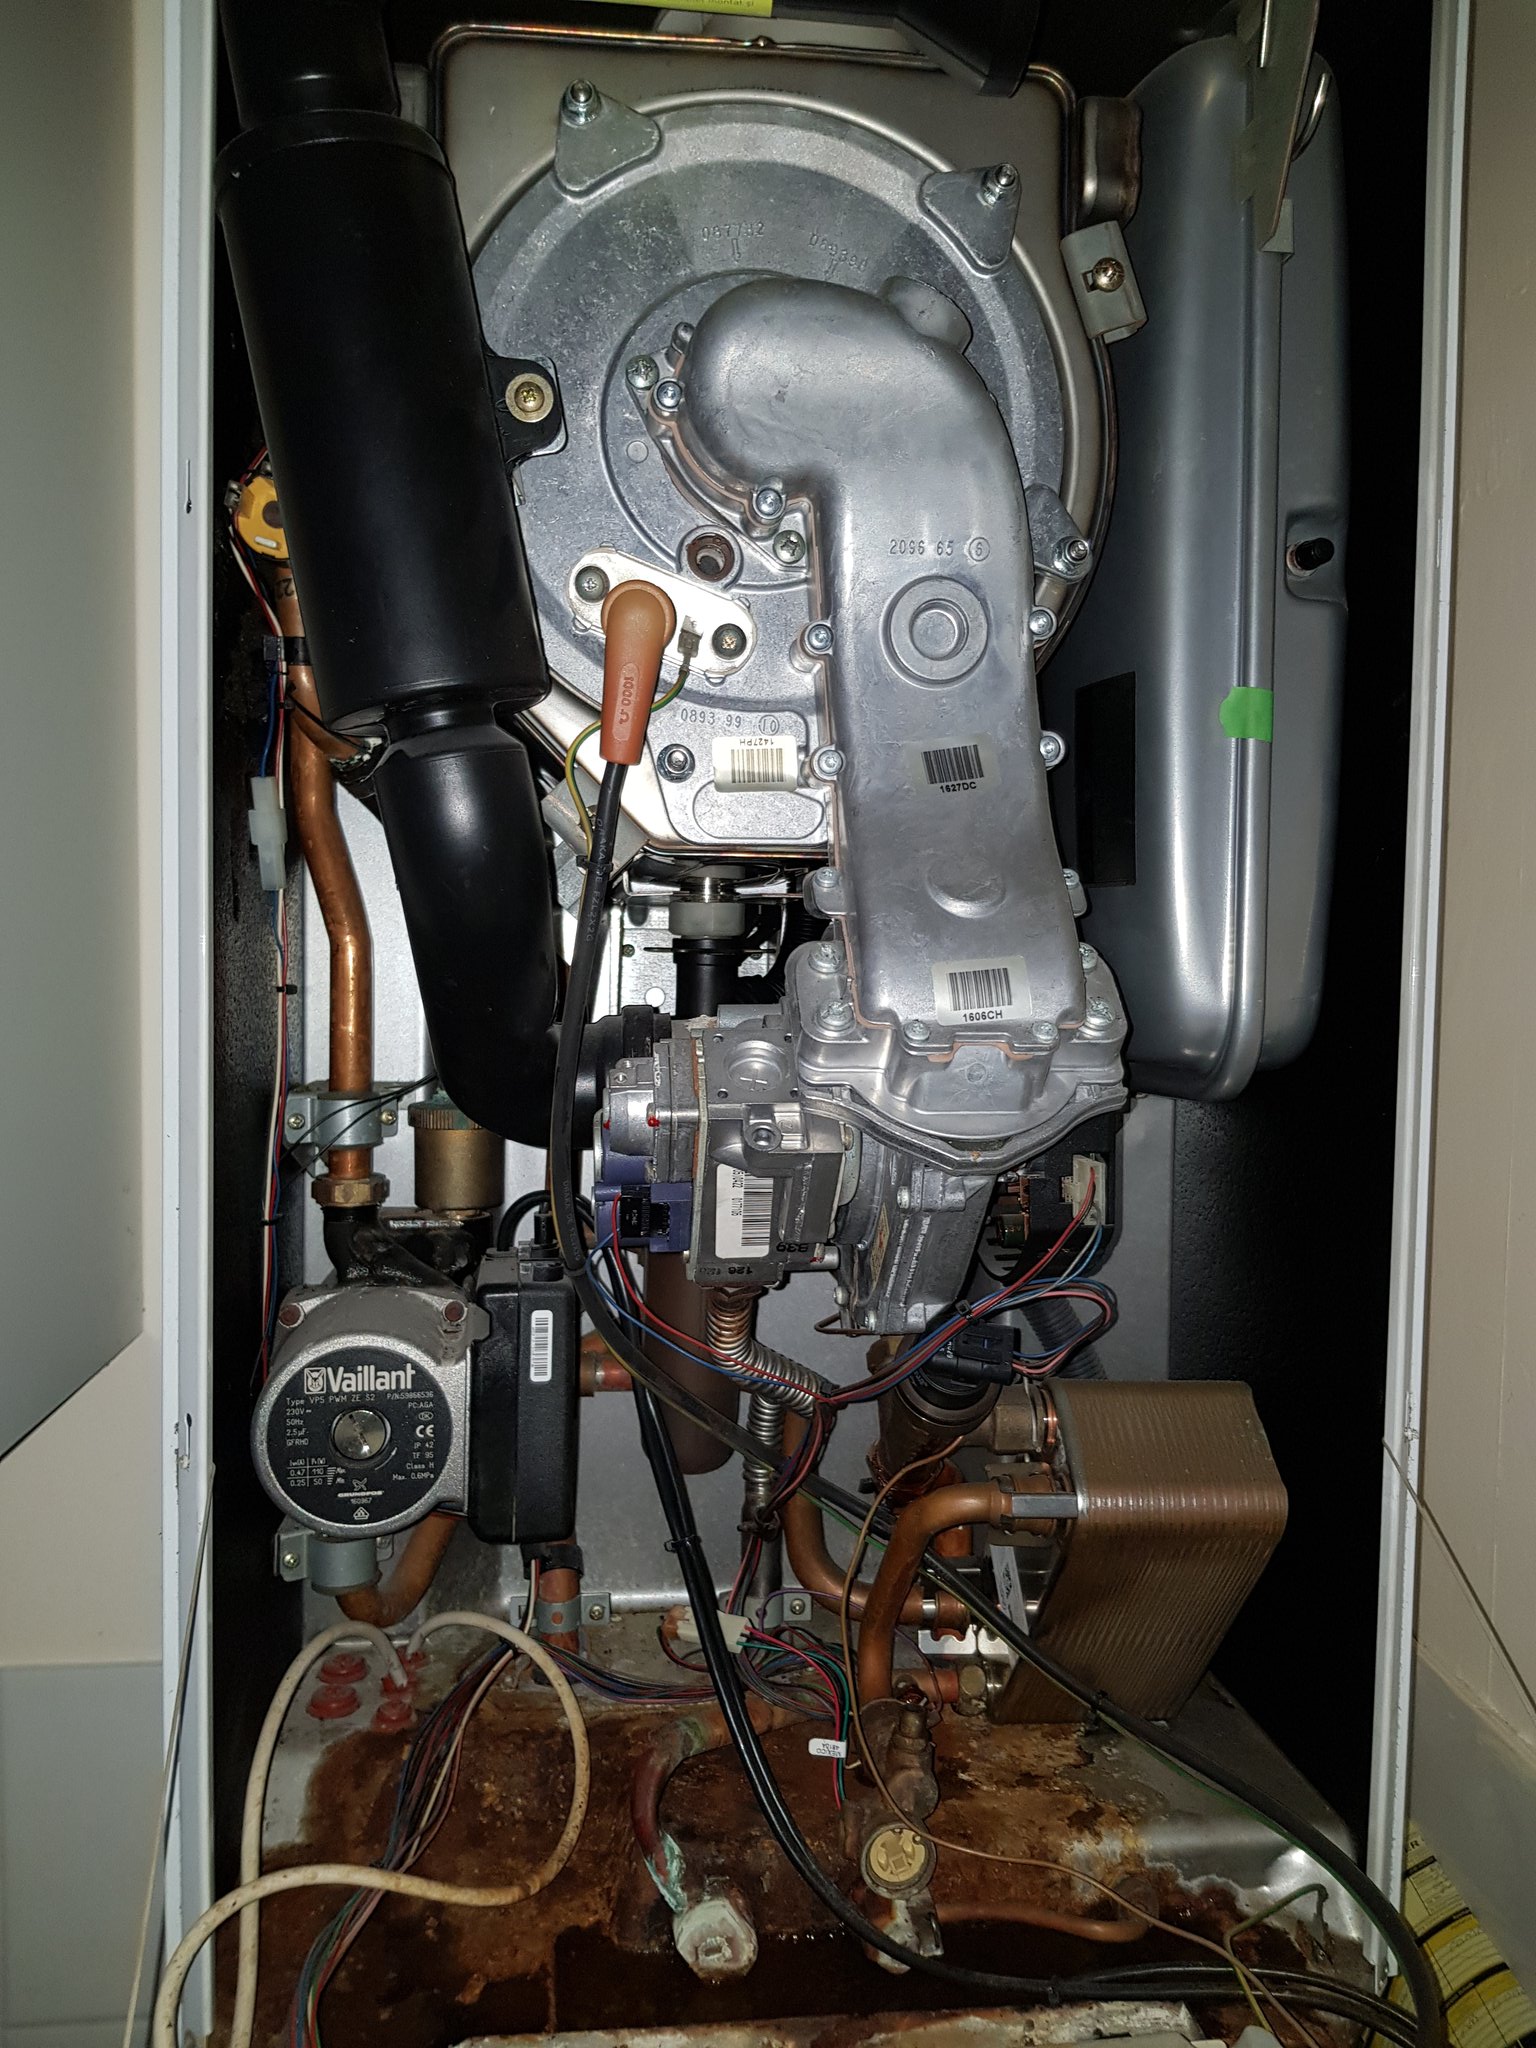 Schaken Refrein een andere Shaw's Plumbing on Twitter: "This @vaillant boiler was serviced a couple of  months ago so the landlord says. Casing door seal insulation damaged and  casing door clips broken, along with loads of